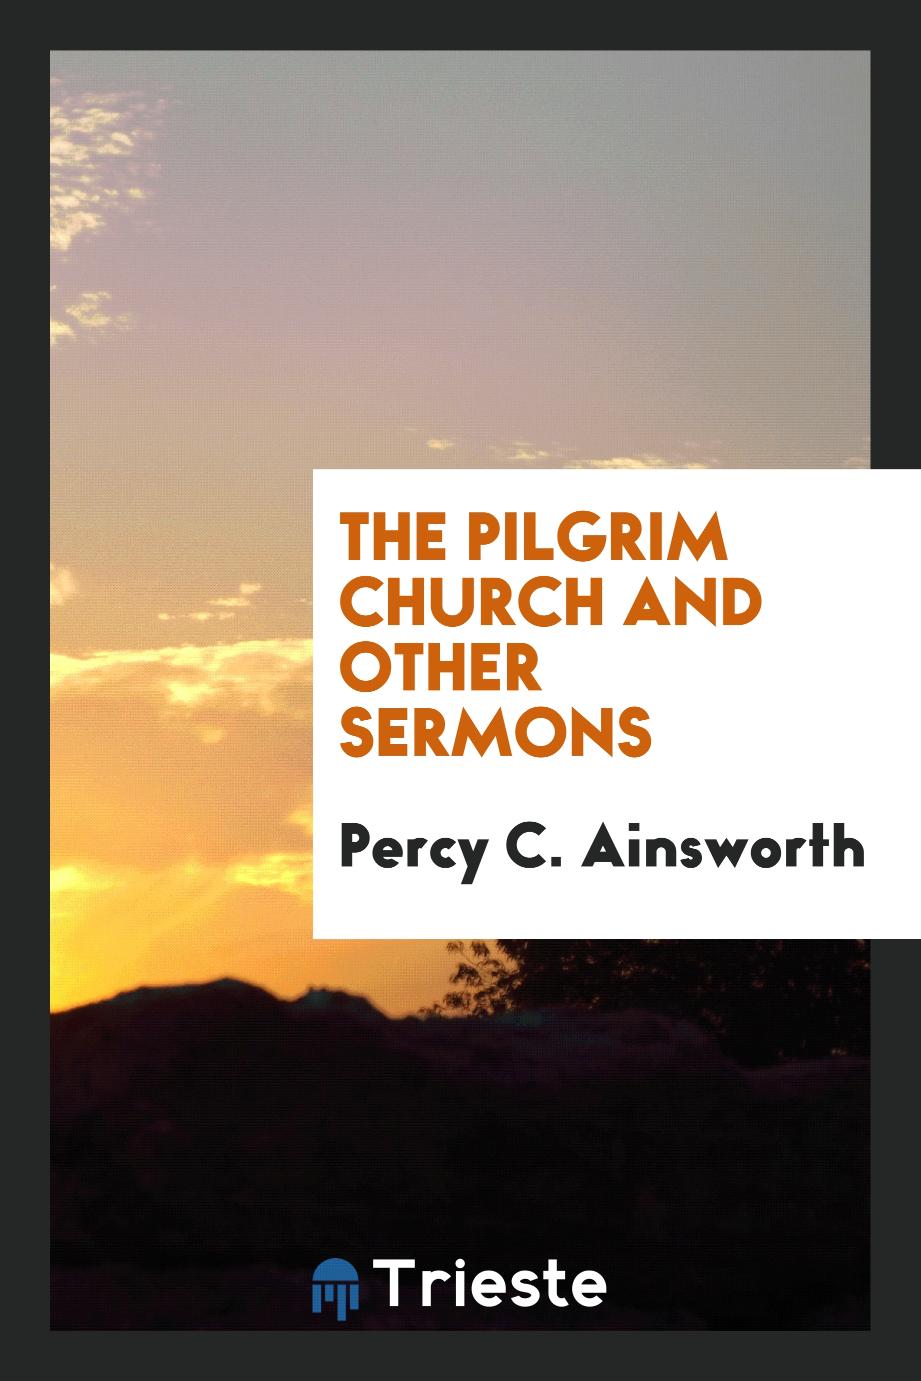 The pilgrim church and other sermons